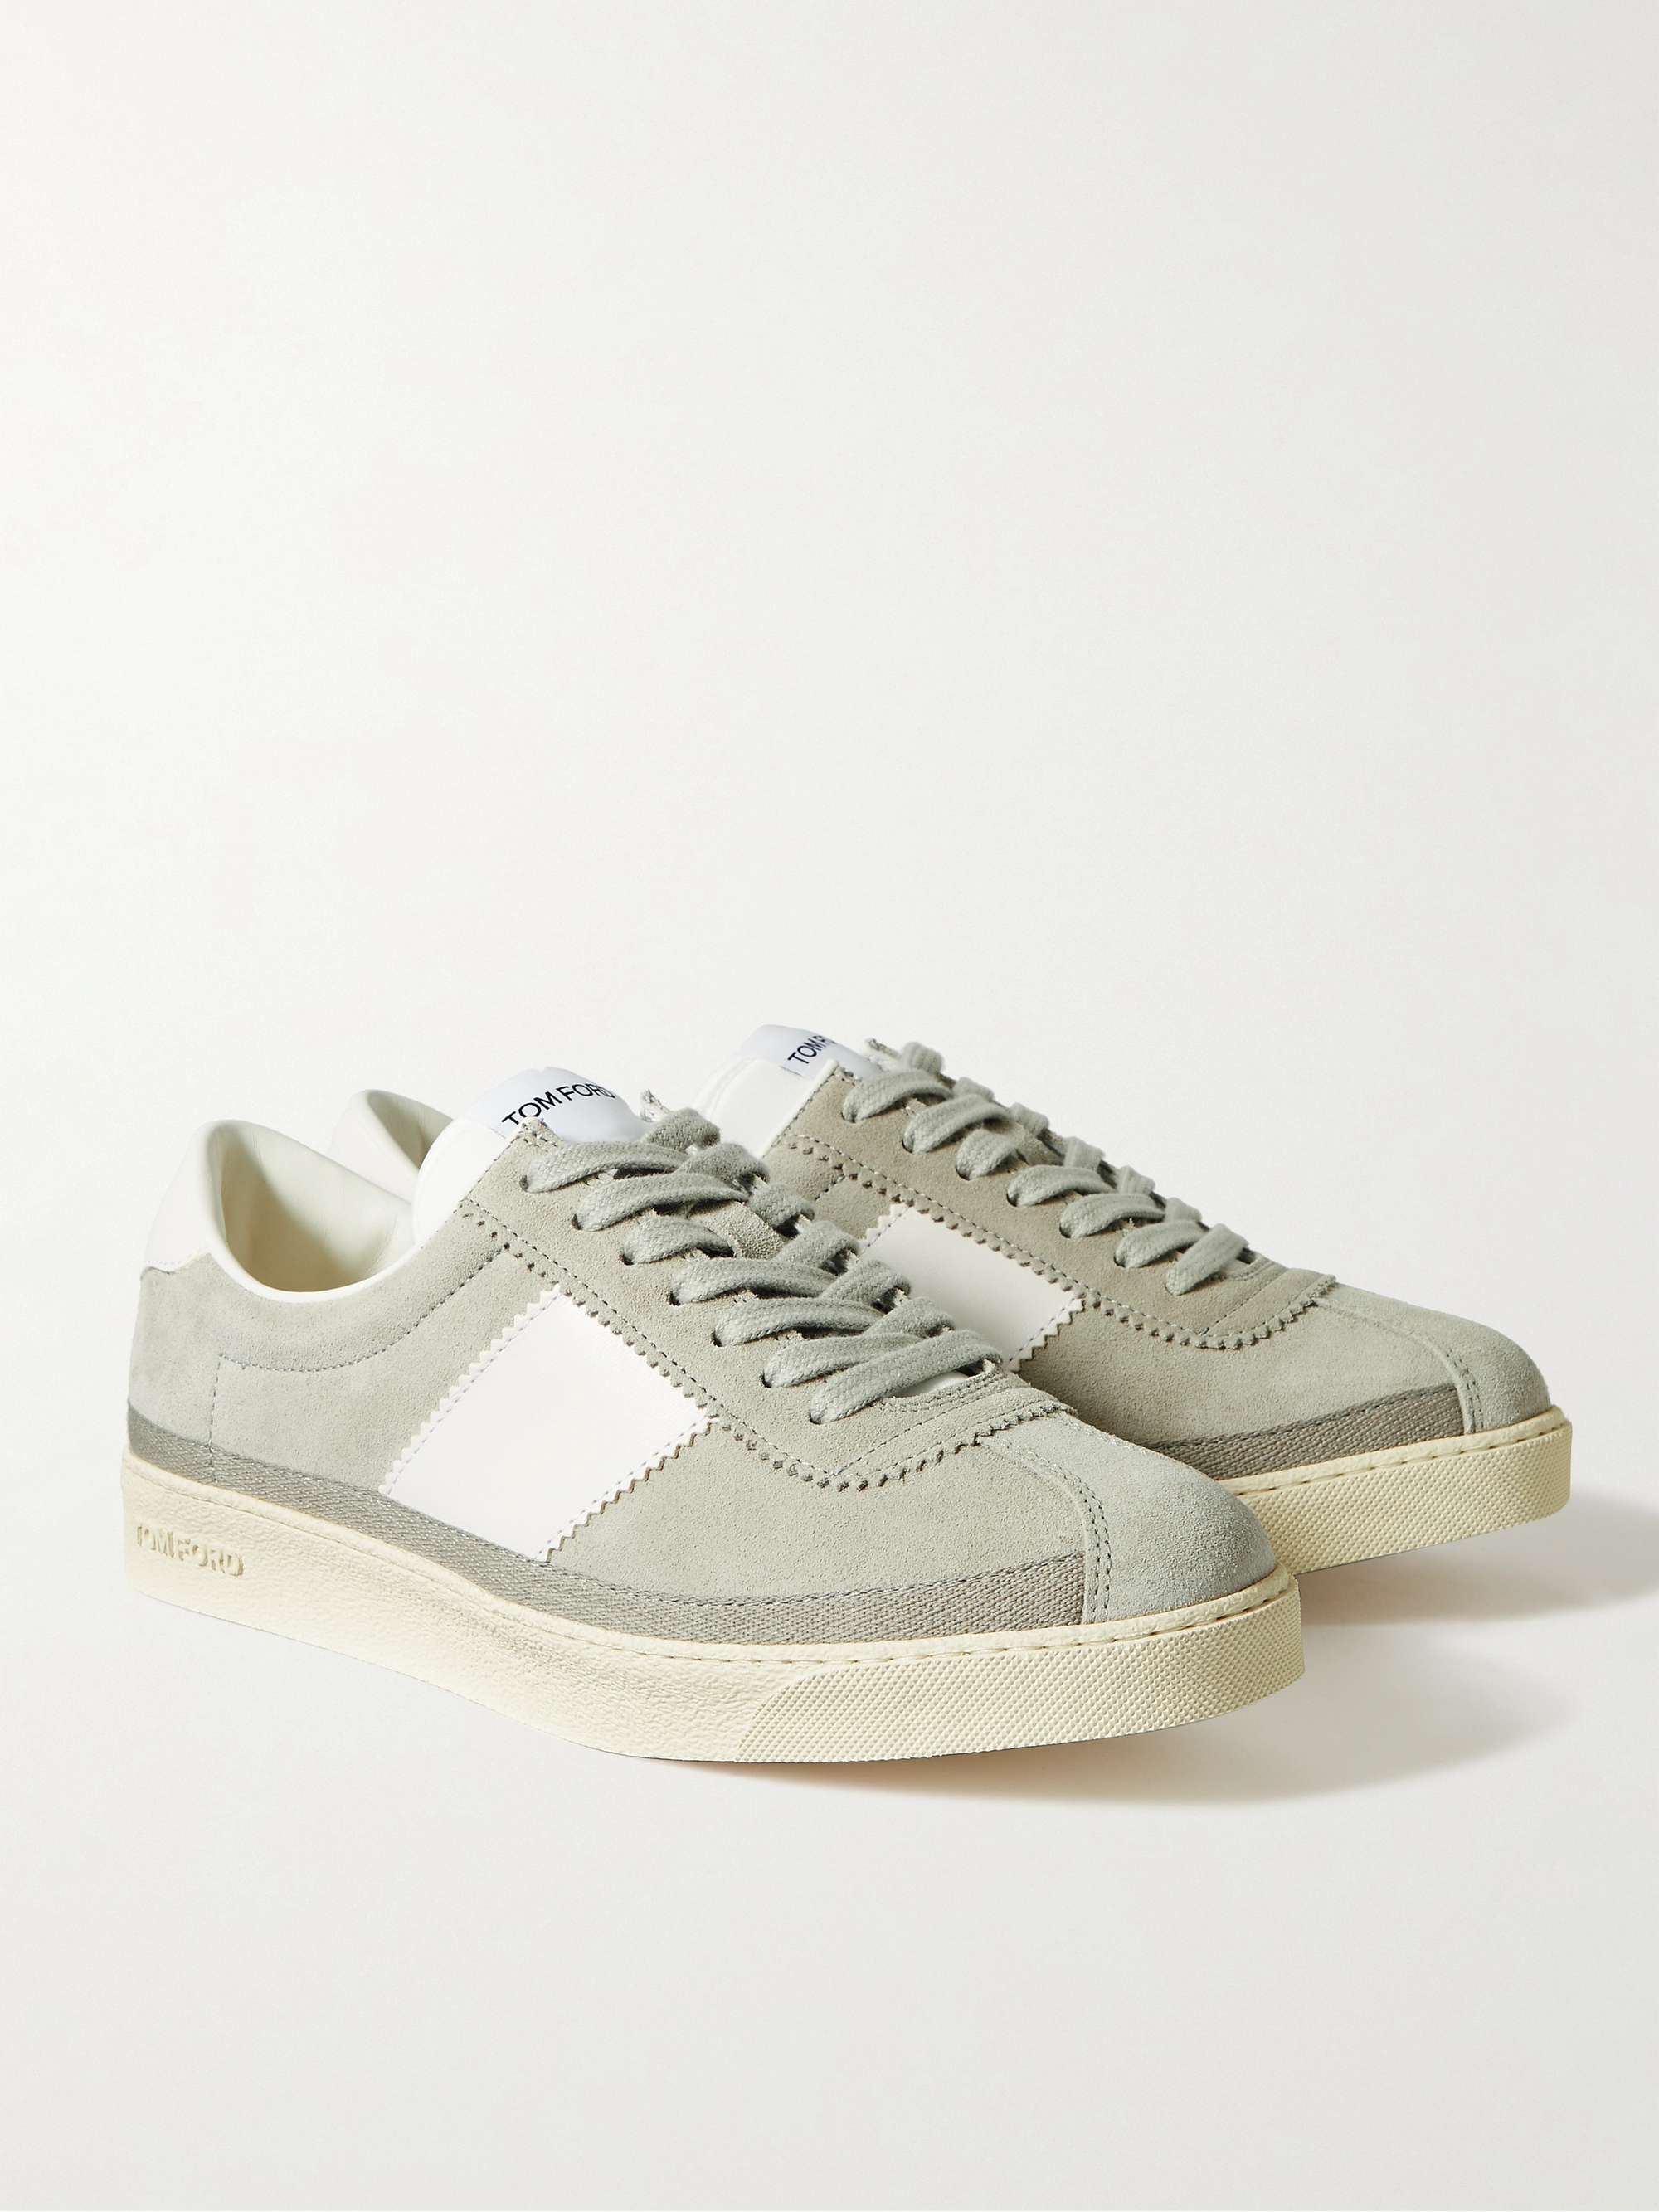 TOM FORD Bannister Leather-Trimmed Suede Sneakers